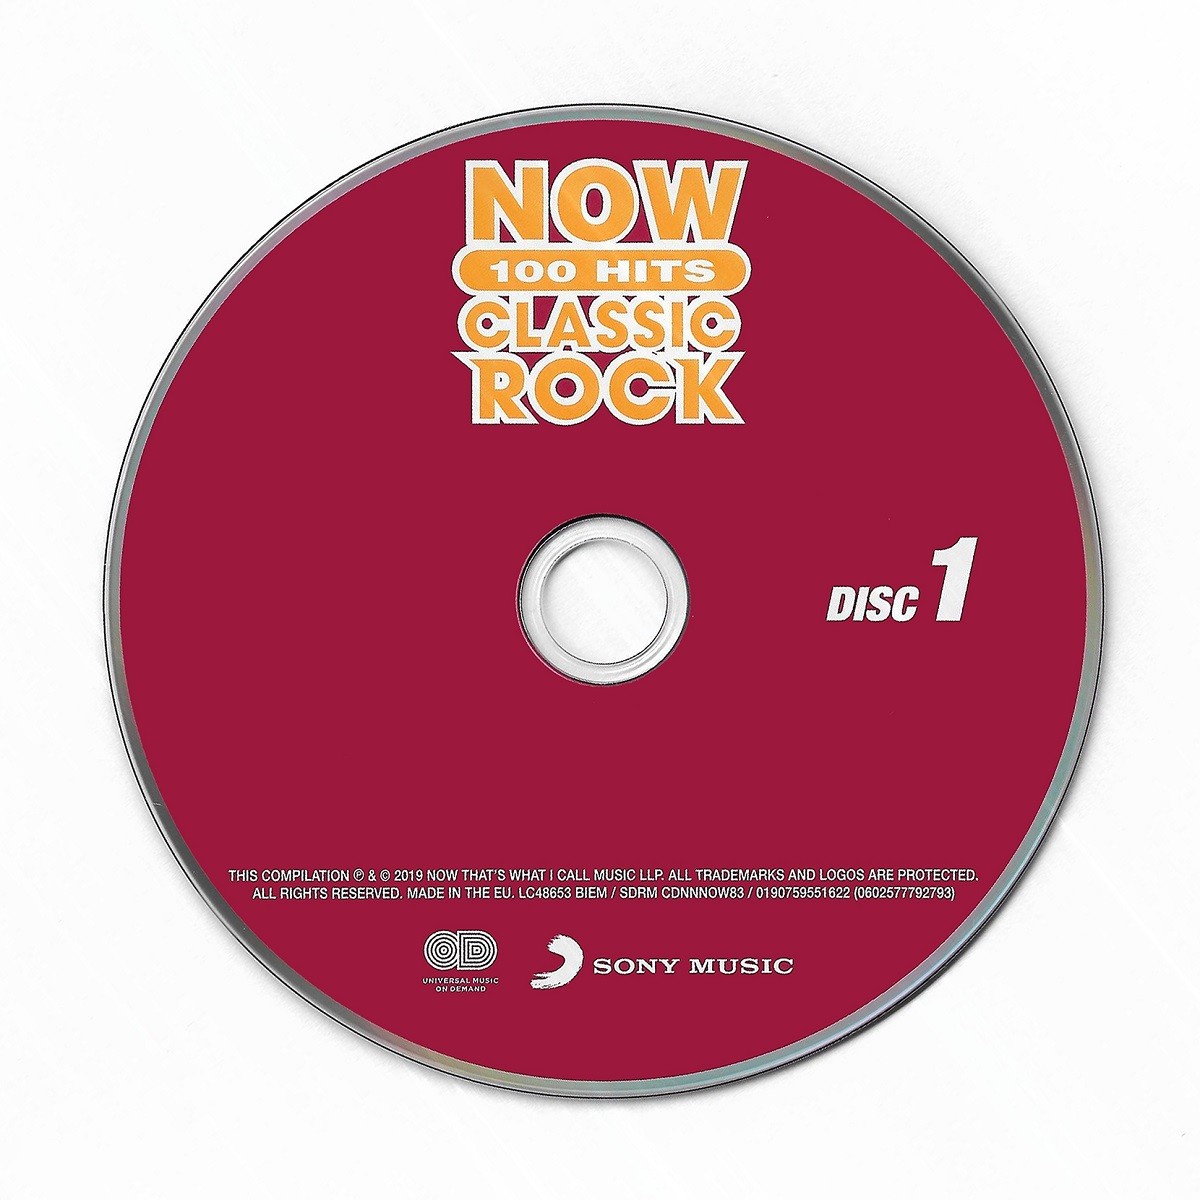 Release “NOW 100 Hits: Classic Rock” by Various Artists - Cover Art 